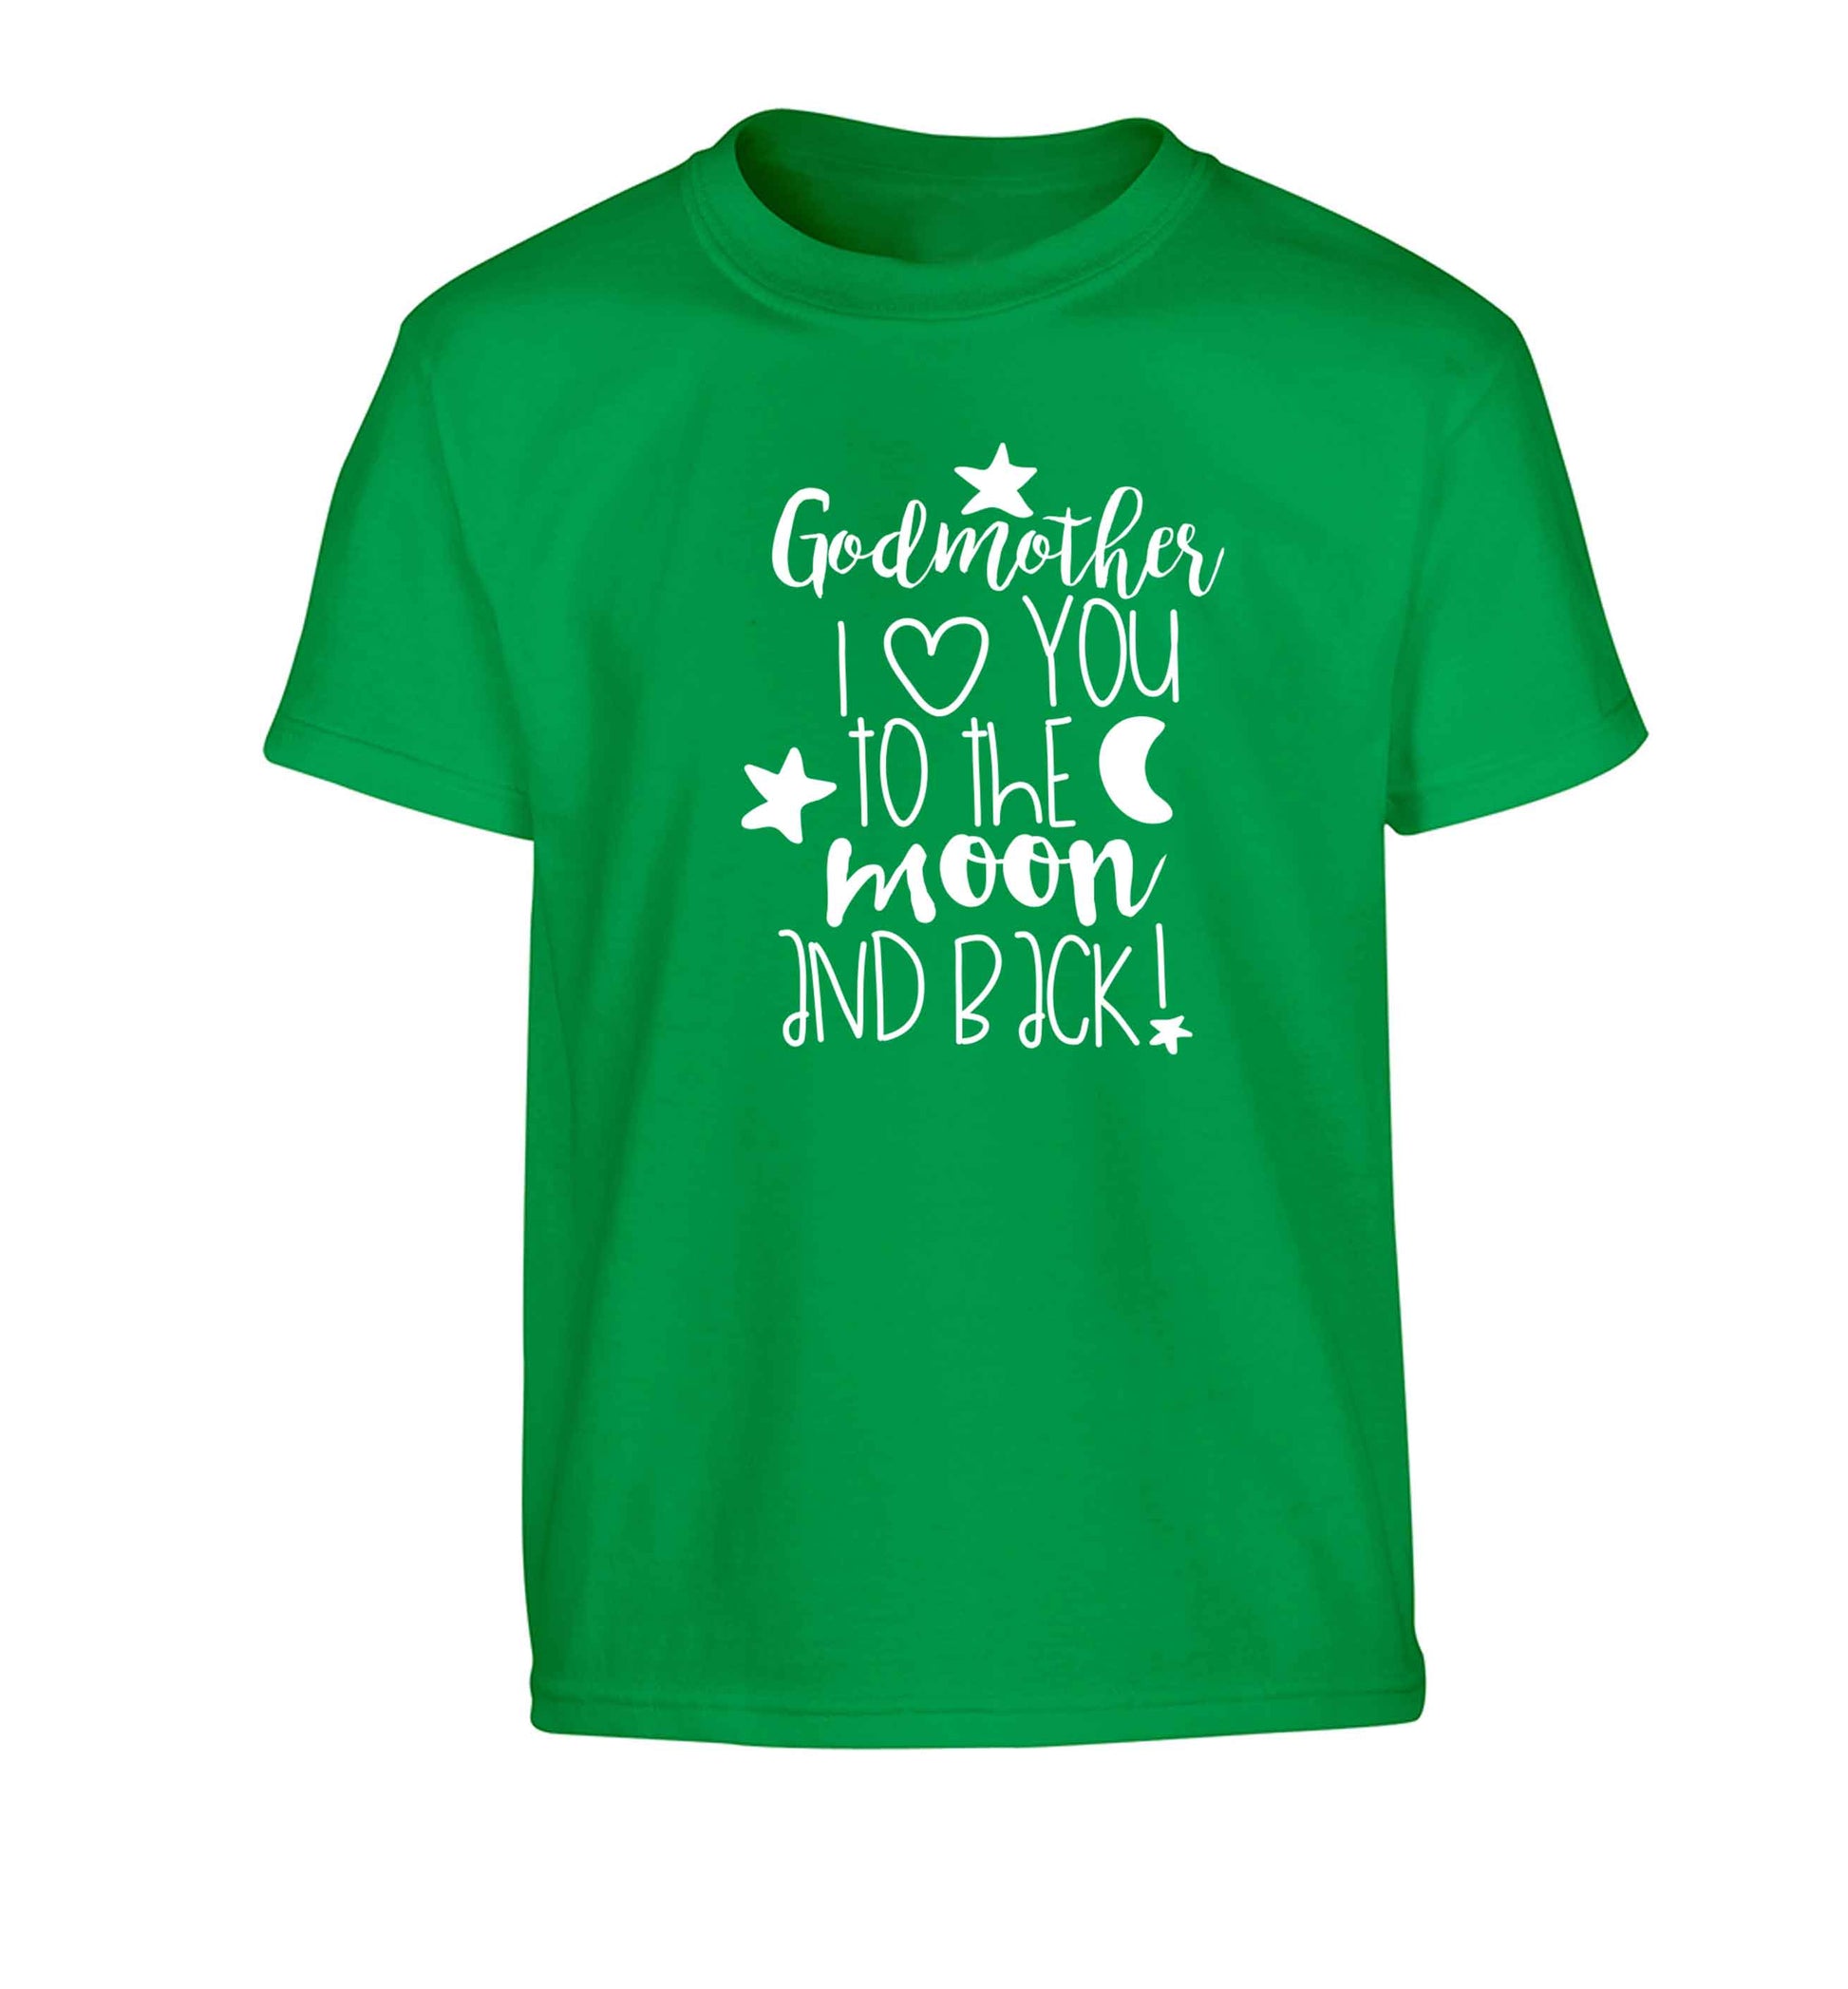 Godmother I love you to the moon and back Children's green Tshirt 12-13 Years